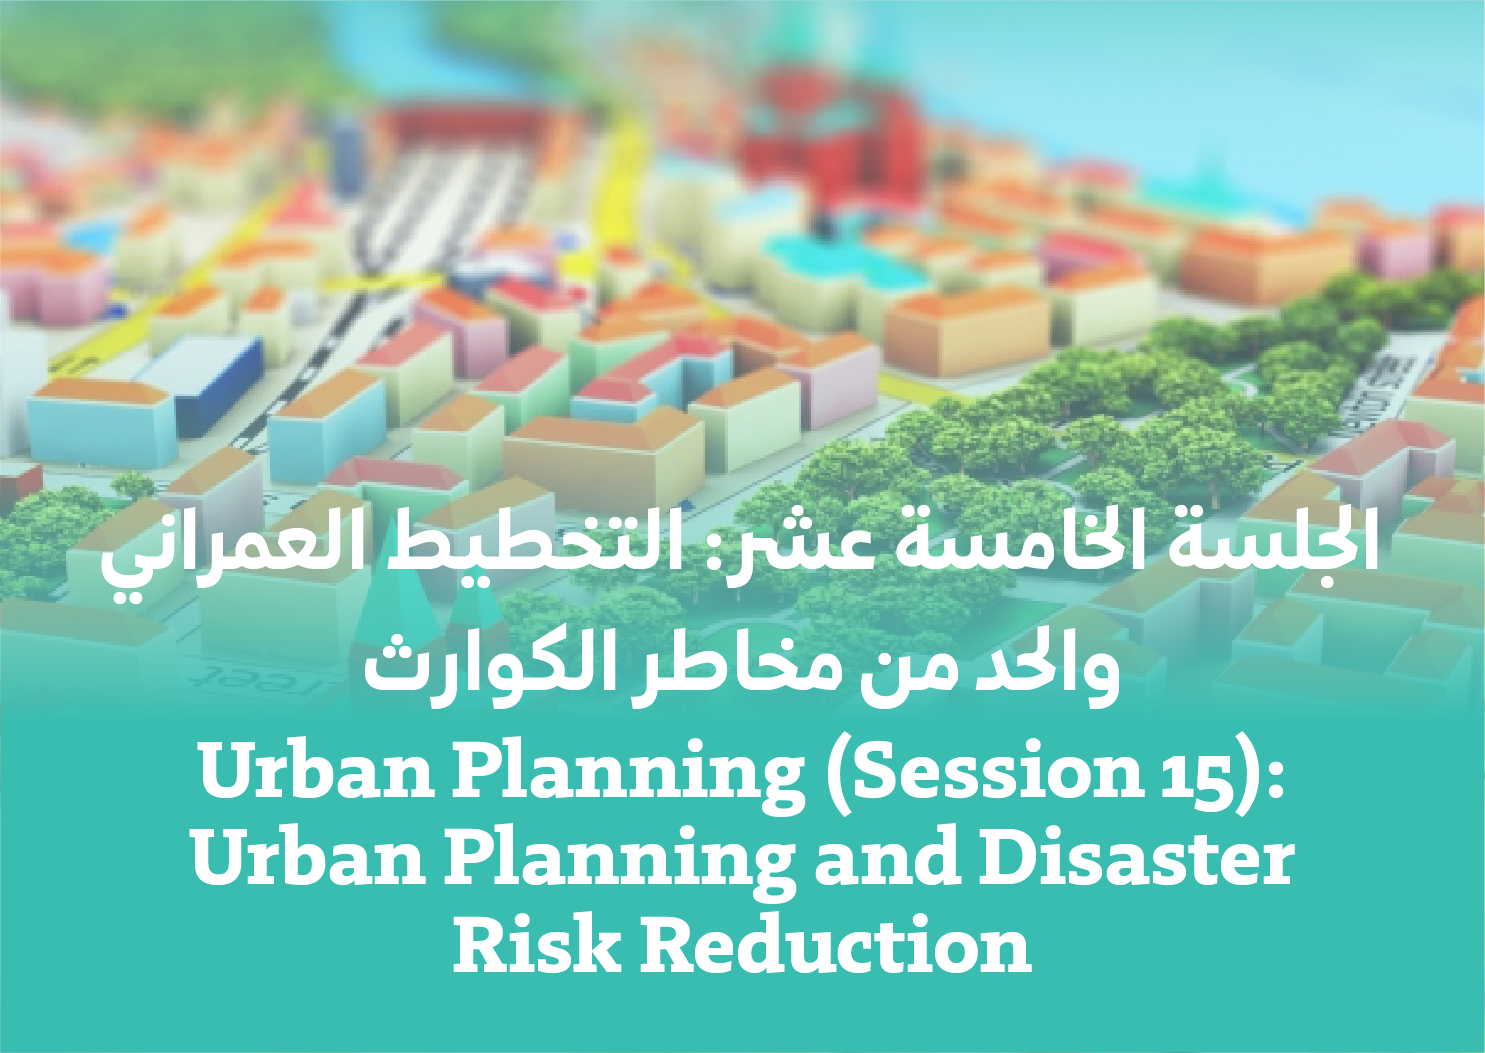 Session 15: Urban Planning and DRR